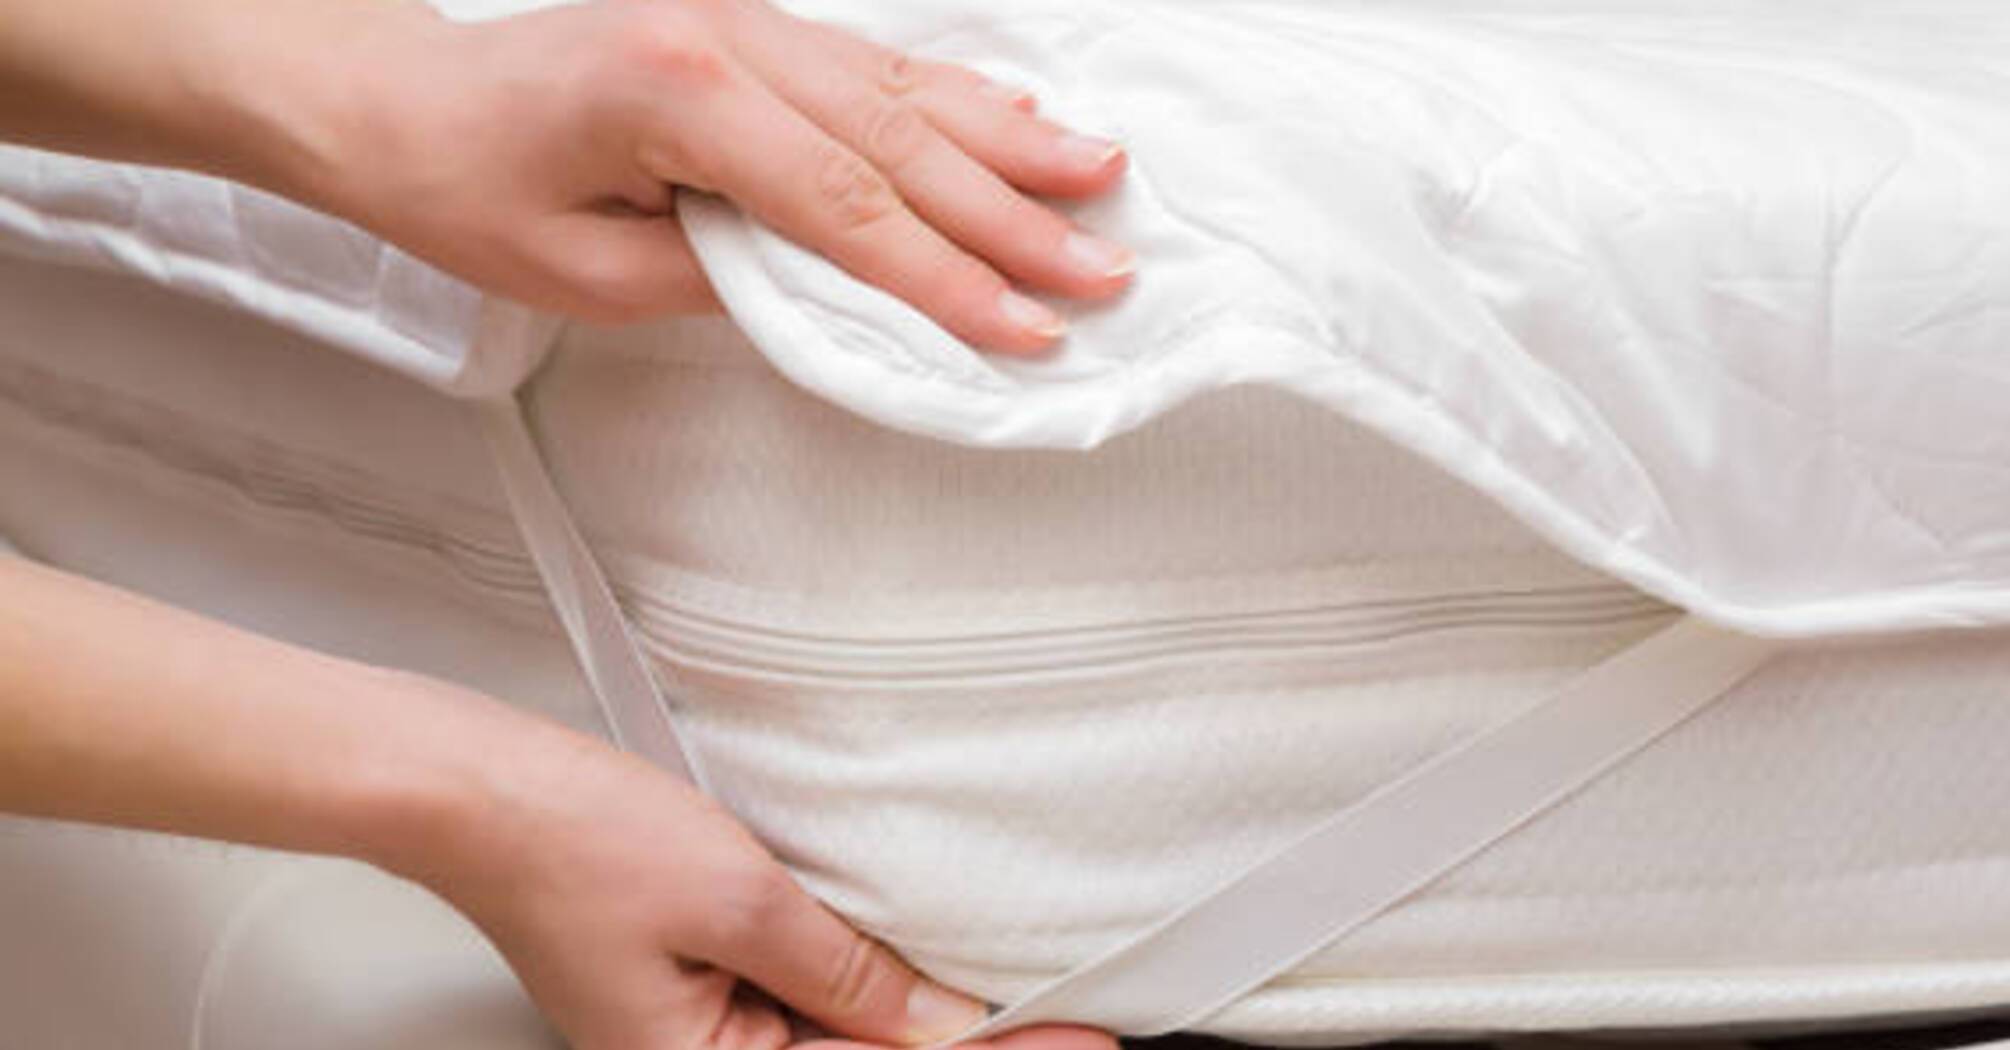 How to remove stains from a mattress cover without removing it: 5 effective tips